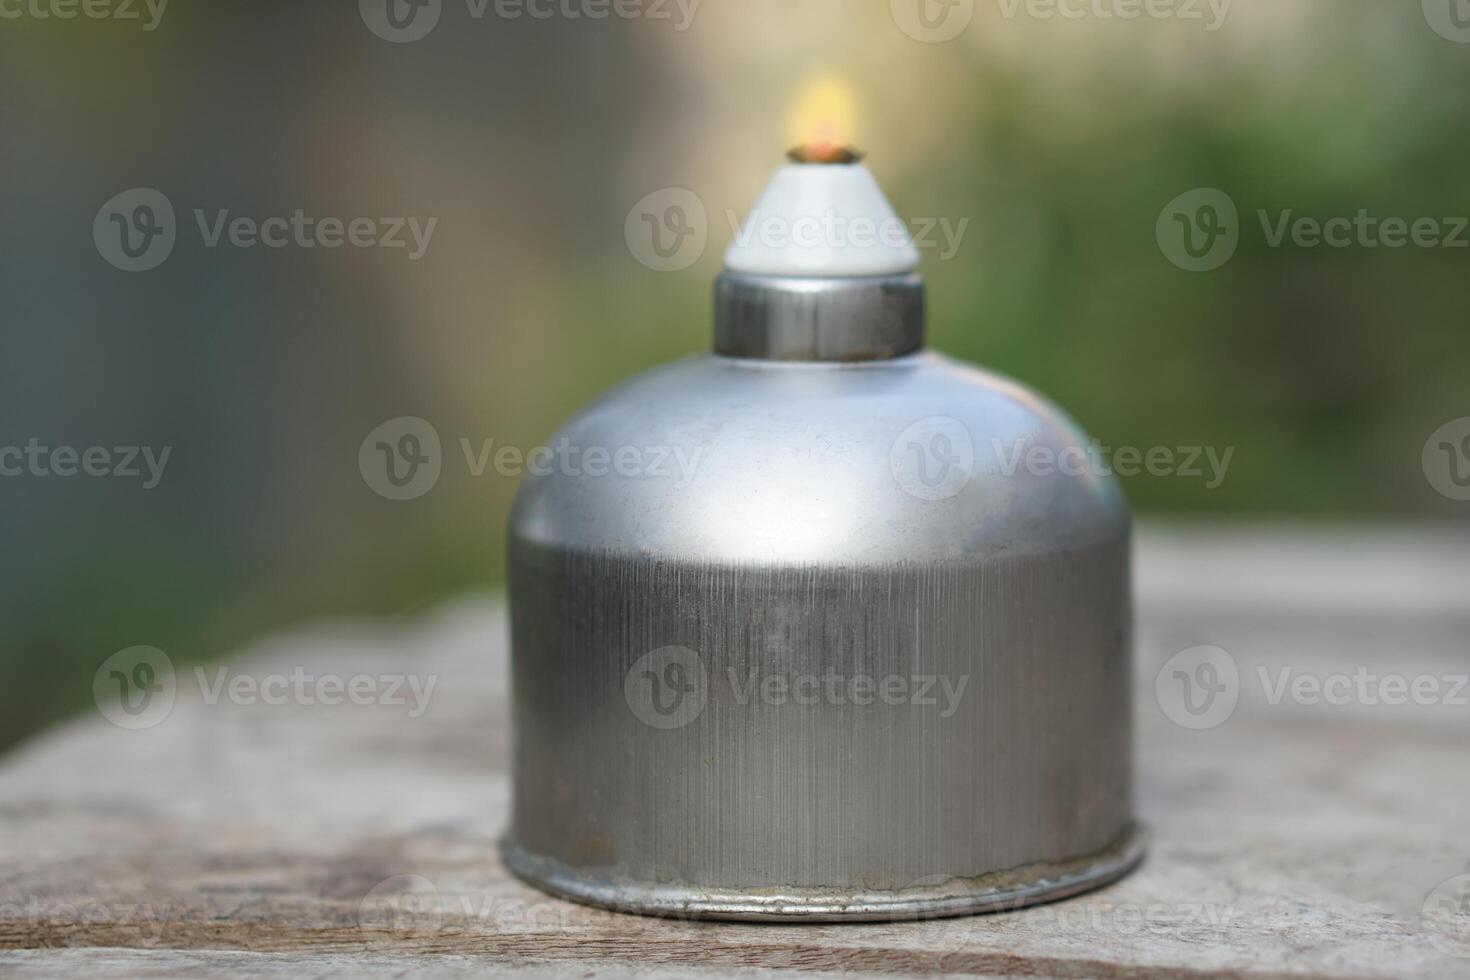 Stainless steel alcohol burner lantern. Laboratory lamp. Concept, equipment or tool for science experiment. Educational toolkit in science subject. photo